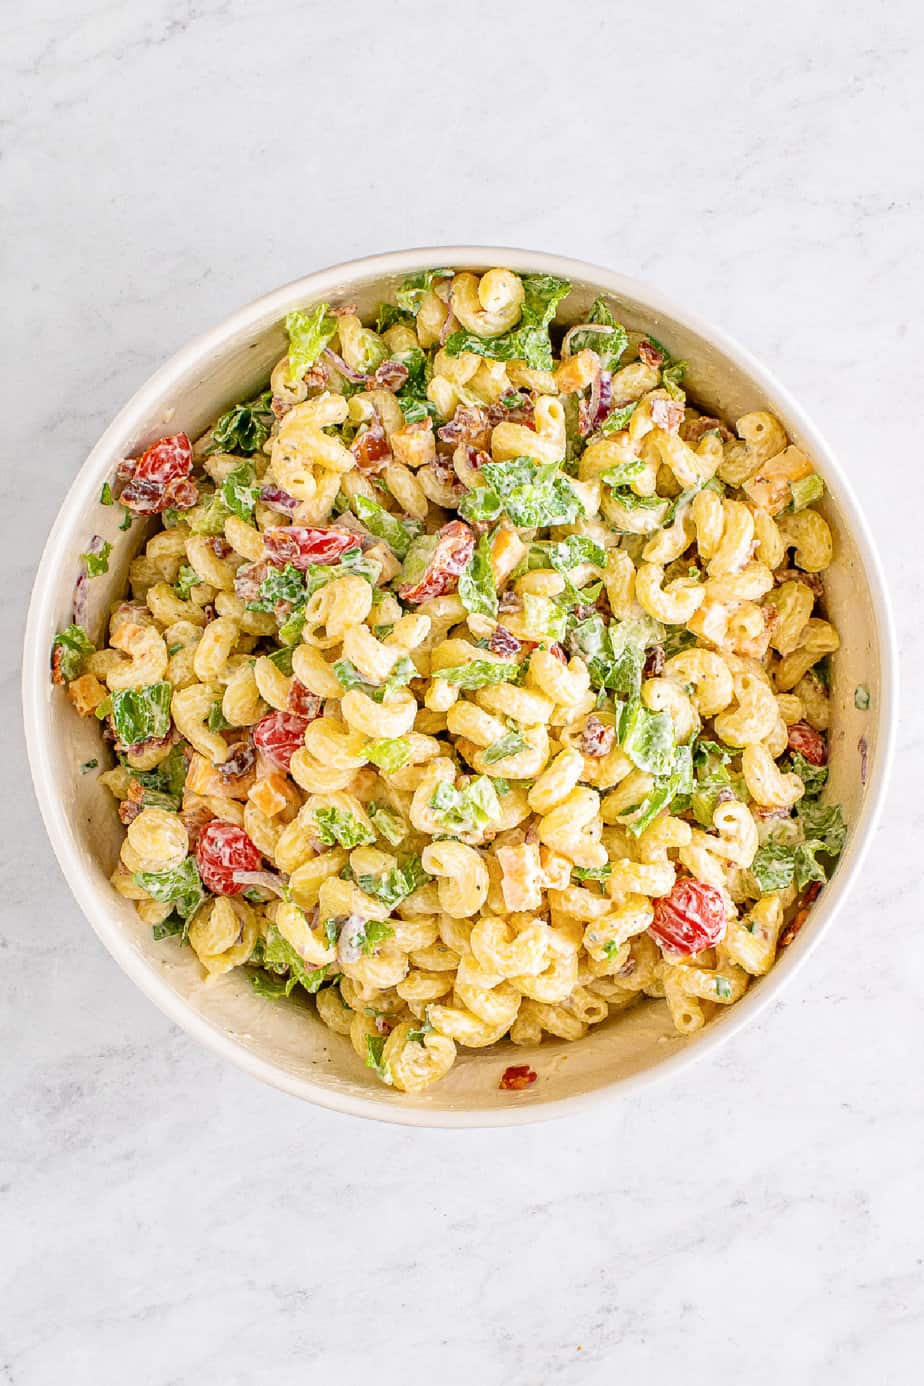 Bacon pieces and lettuce mixed into the bacon ranch pasta salad in a large bowl from overhead on the counter.